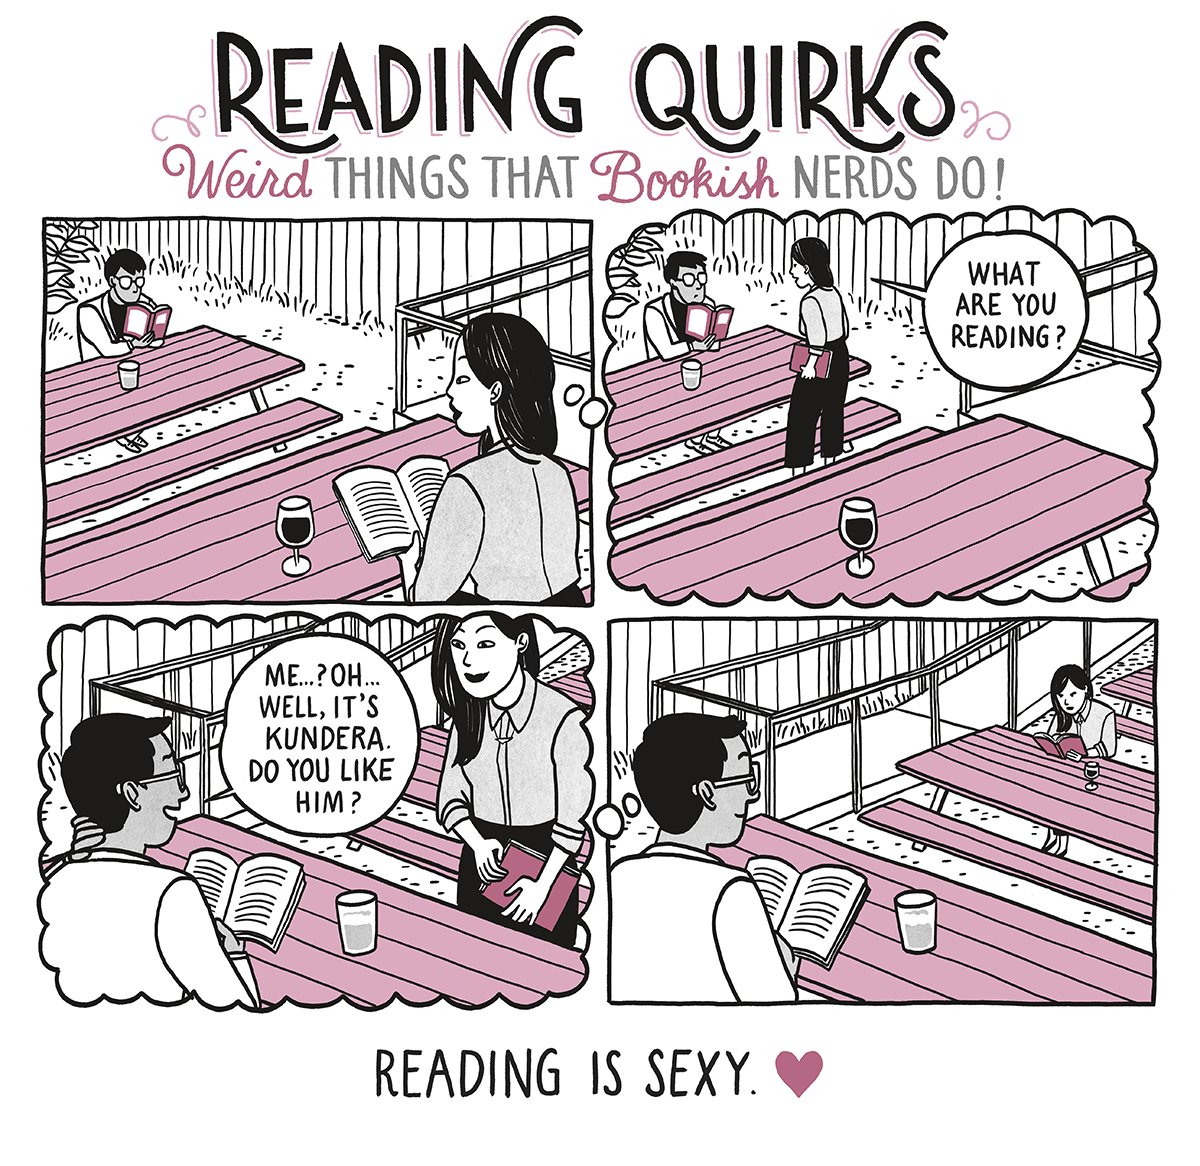 Reading Quirks #06